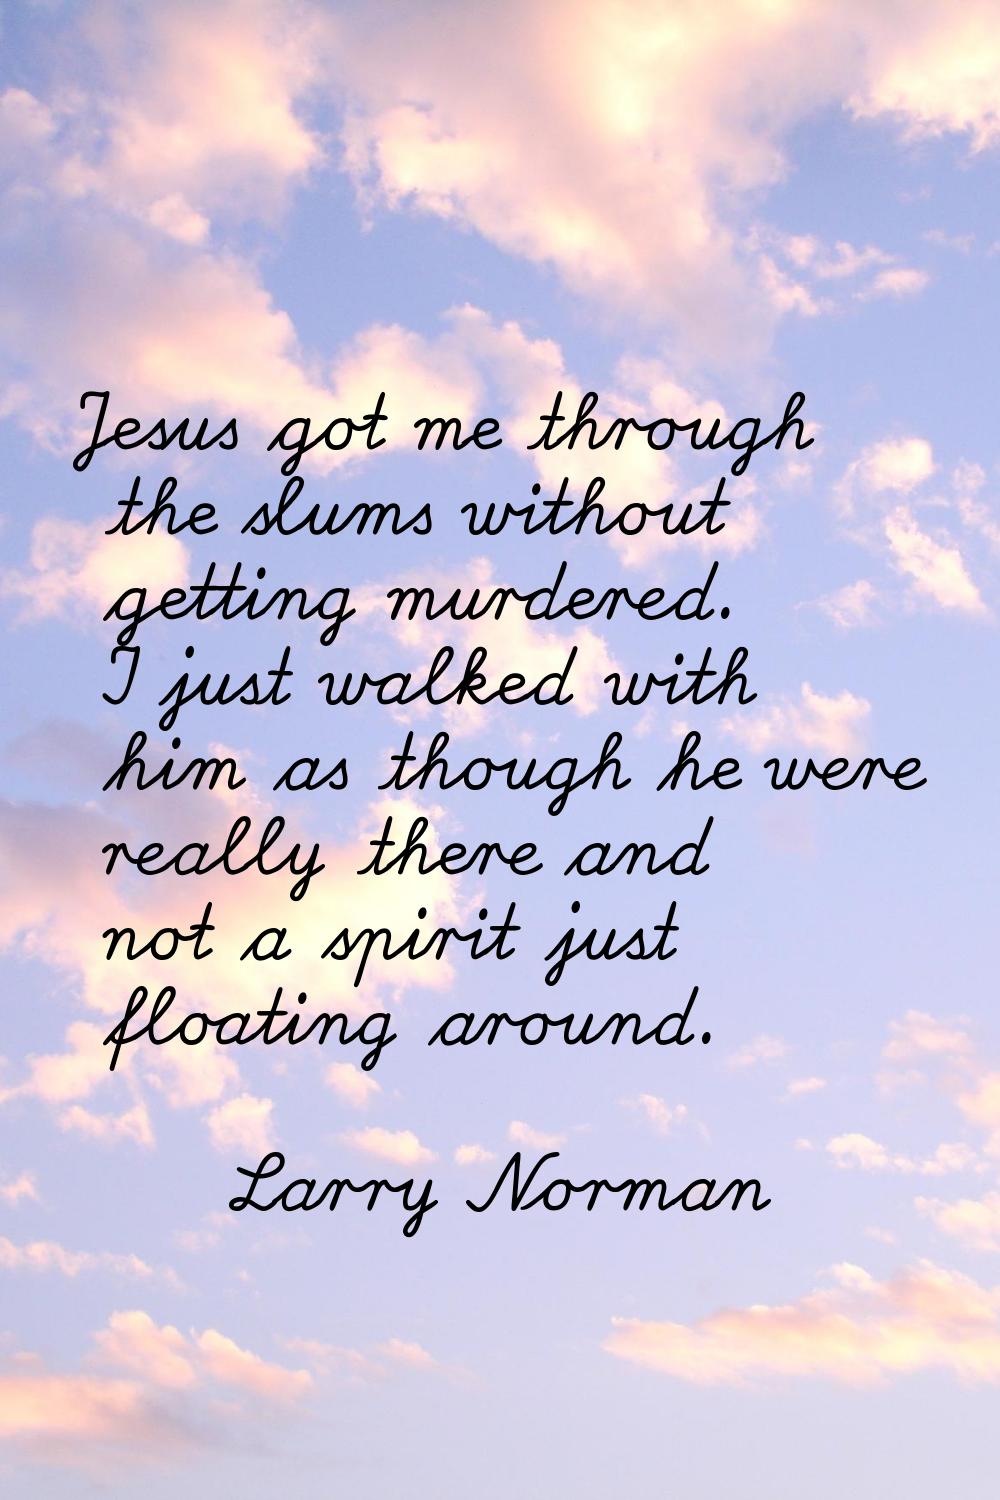 Jesus got me through the slums without getting murdered. I just walked with him as though he were r